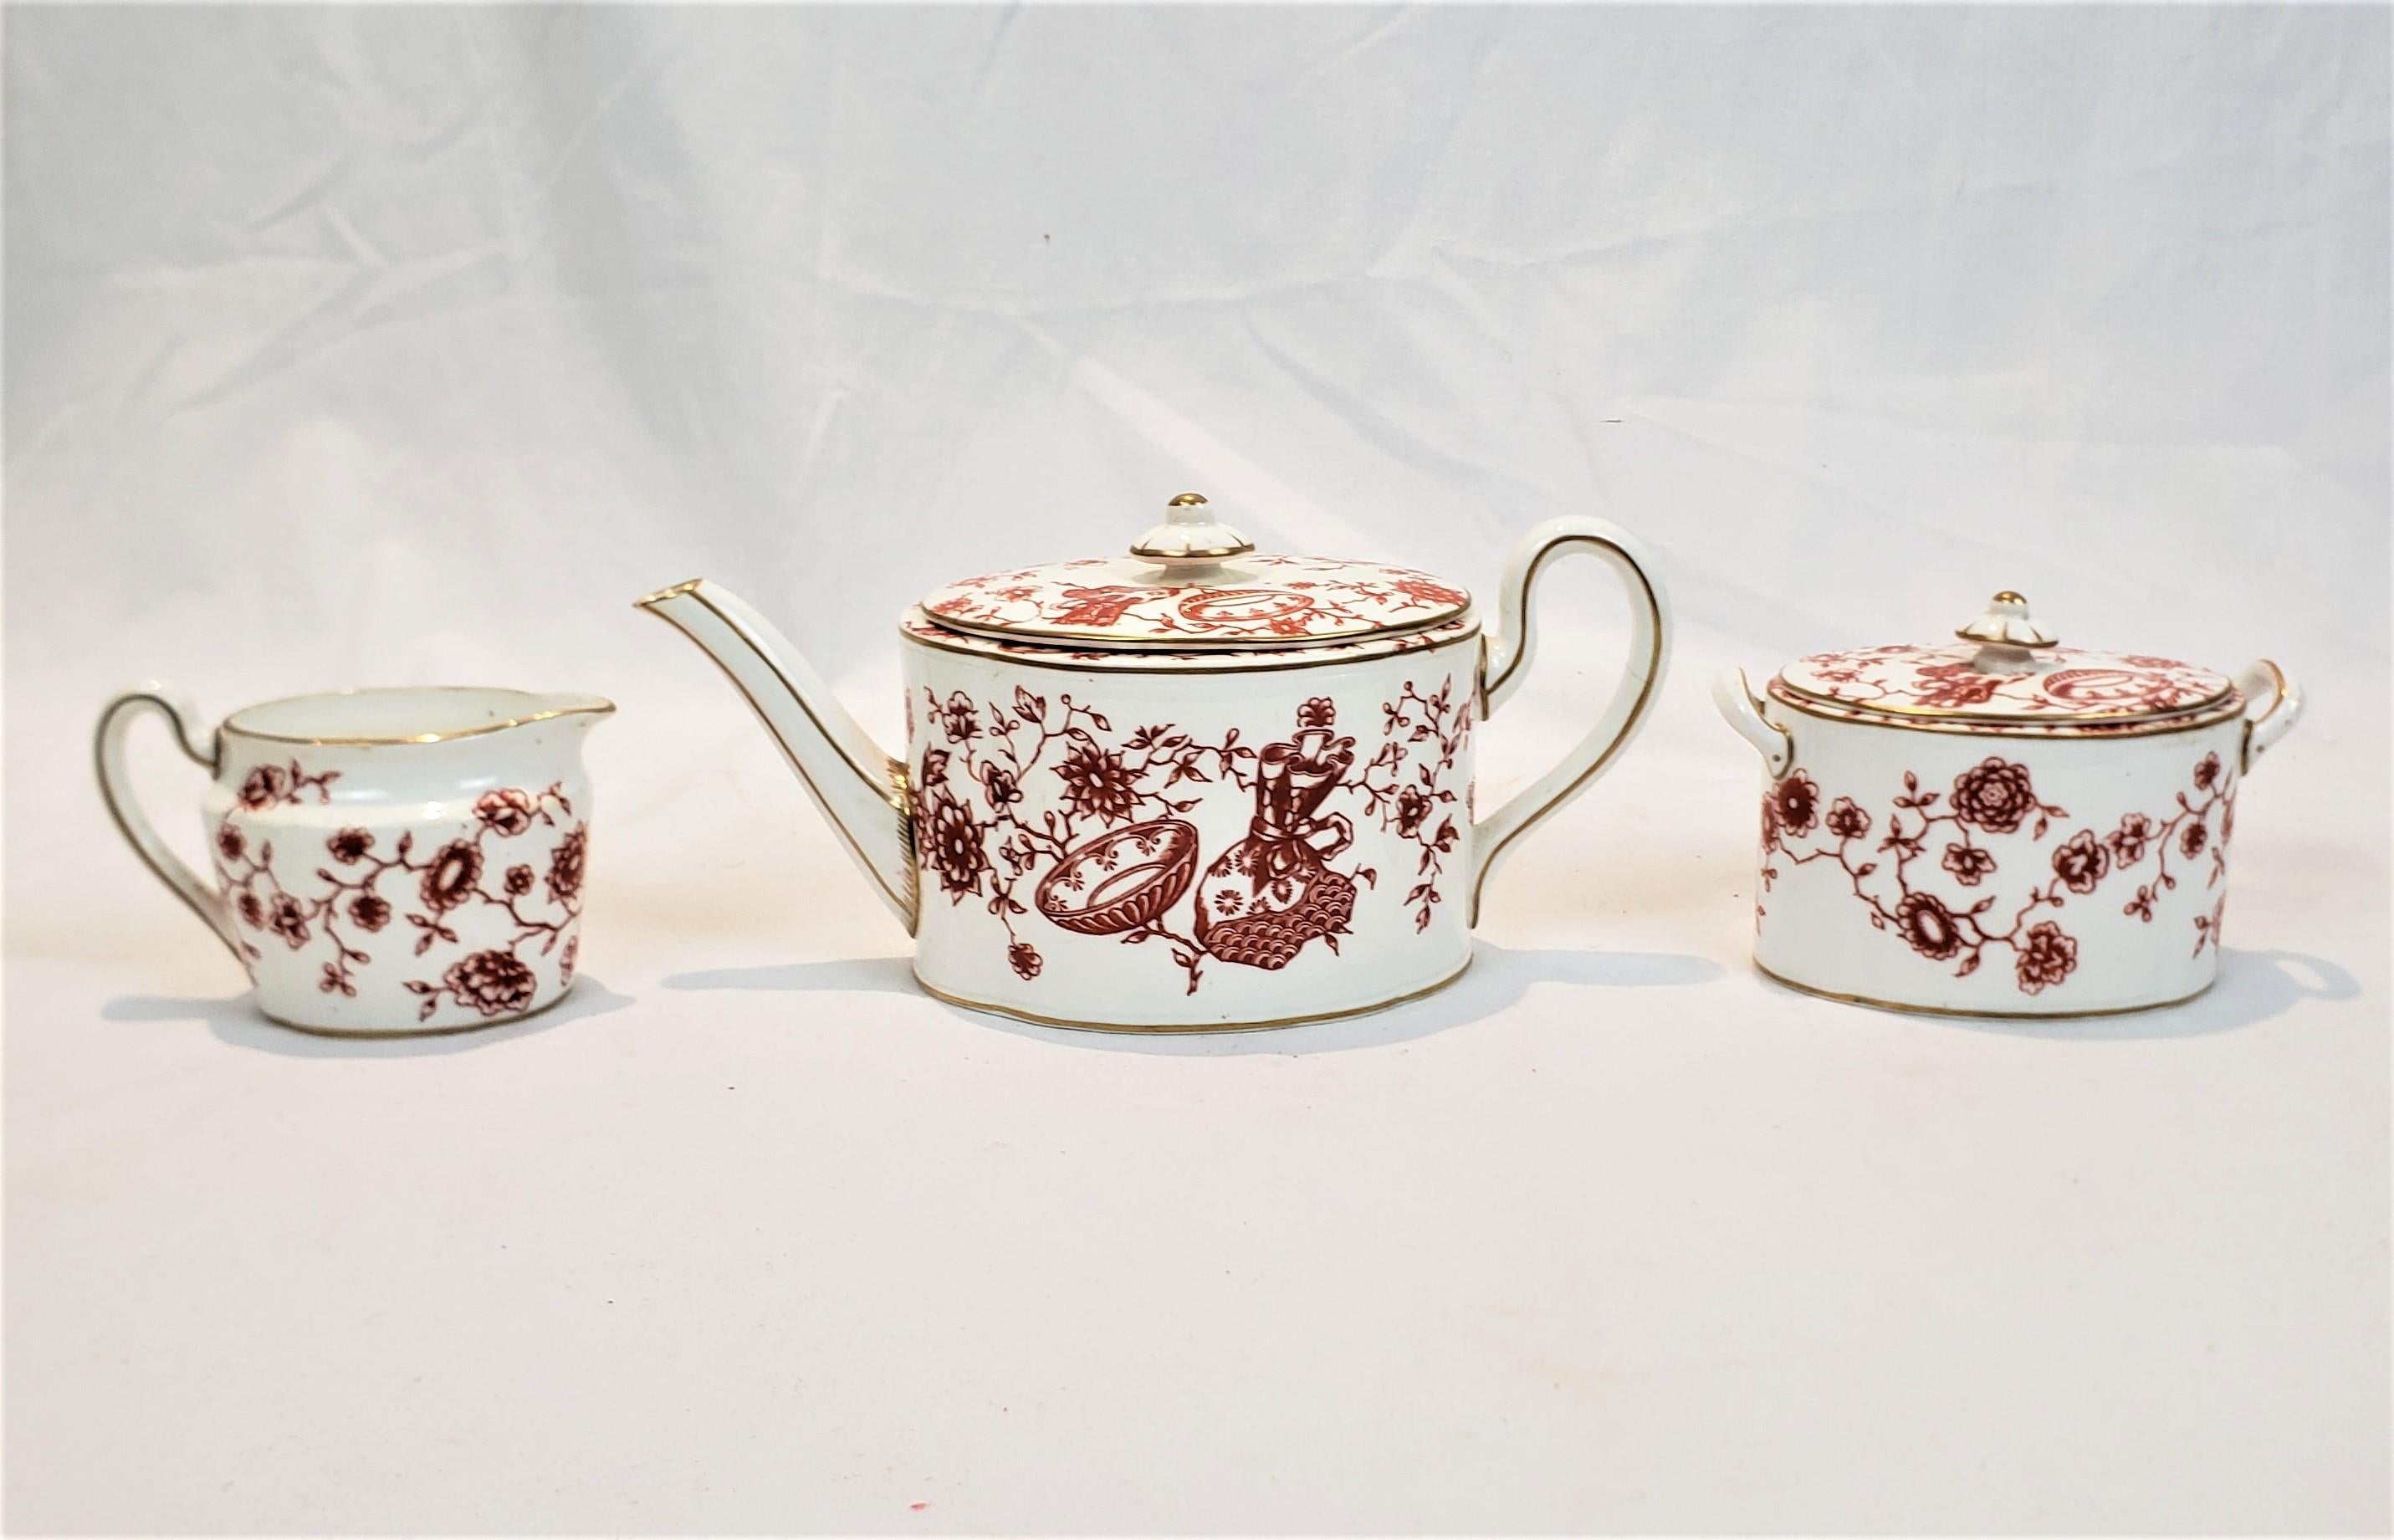 This teapot and cream and sugar set were made by the well known Royal Crown Derby maker of England and dates to approximately 1850 and done in the period Chinoiserie style. The set is composed of porcelain with a small, possibly two cup teapot and a